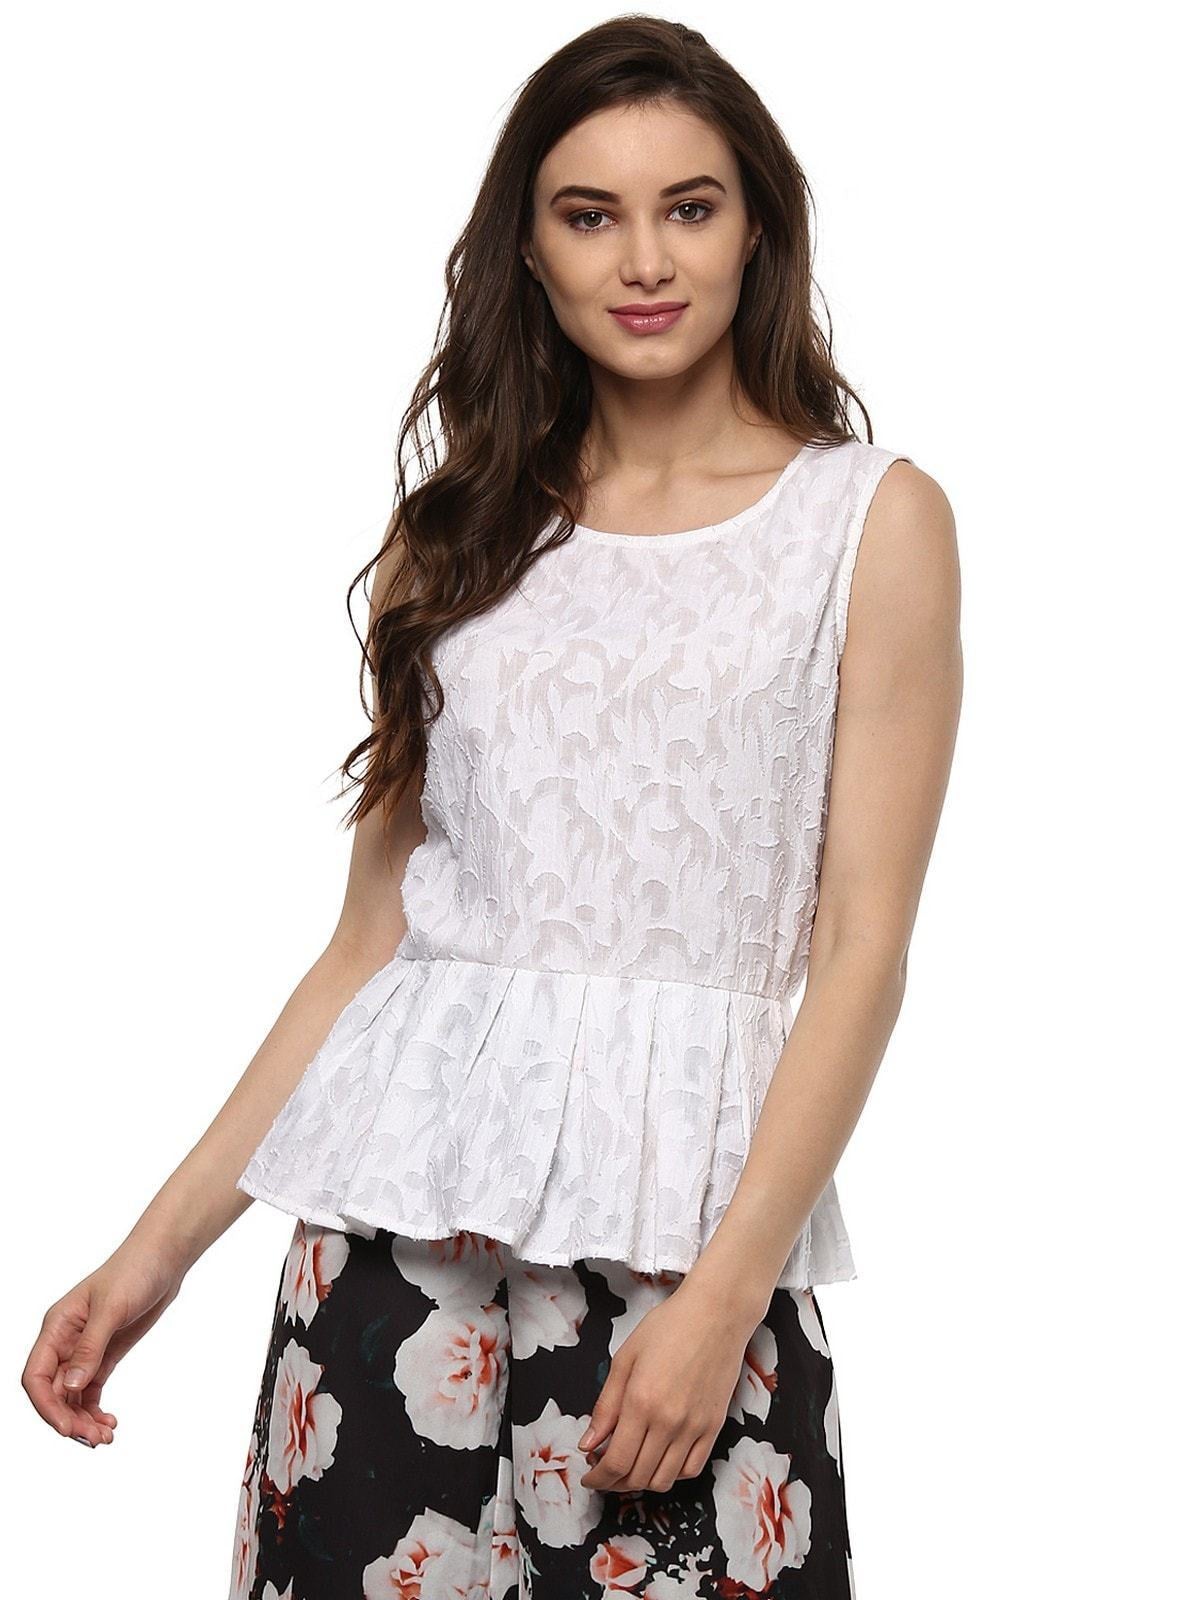 Women's Self Embroidered Sleeveless Top - Pannkh